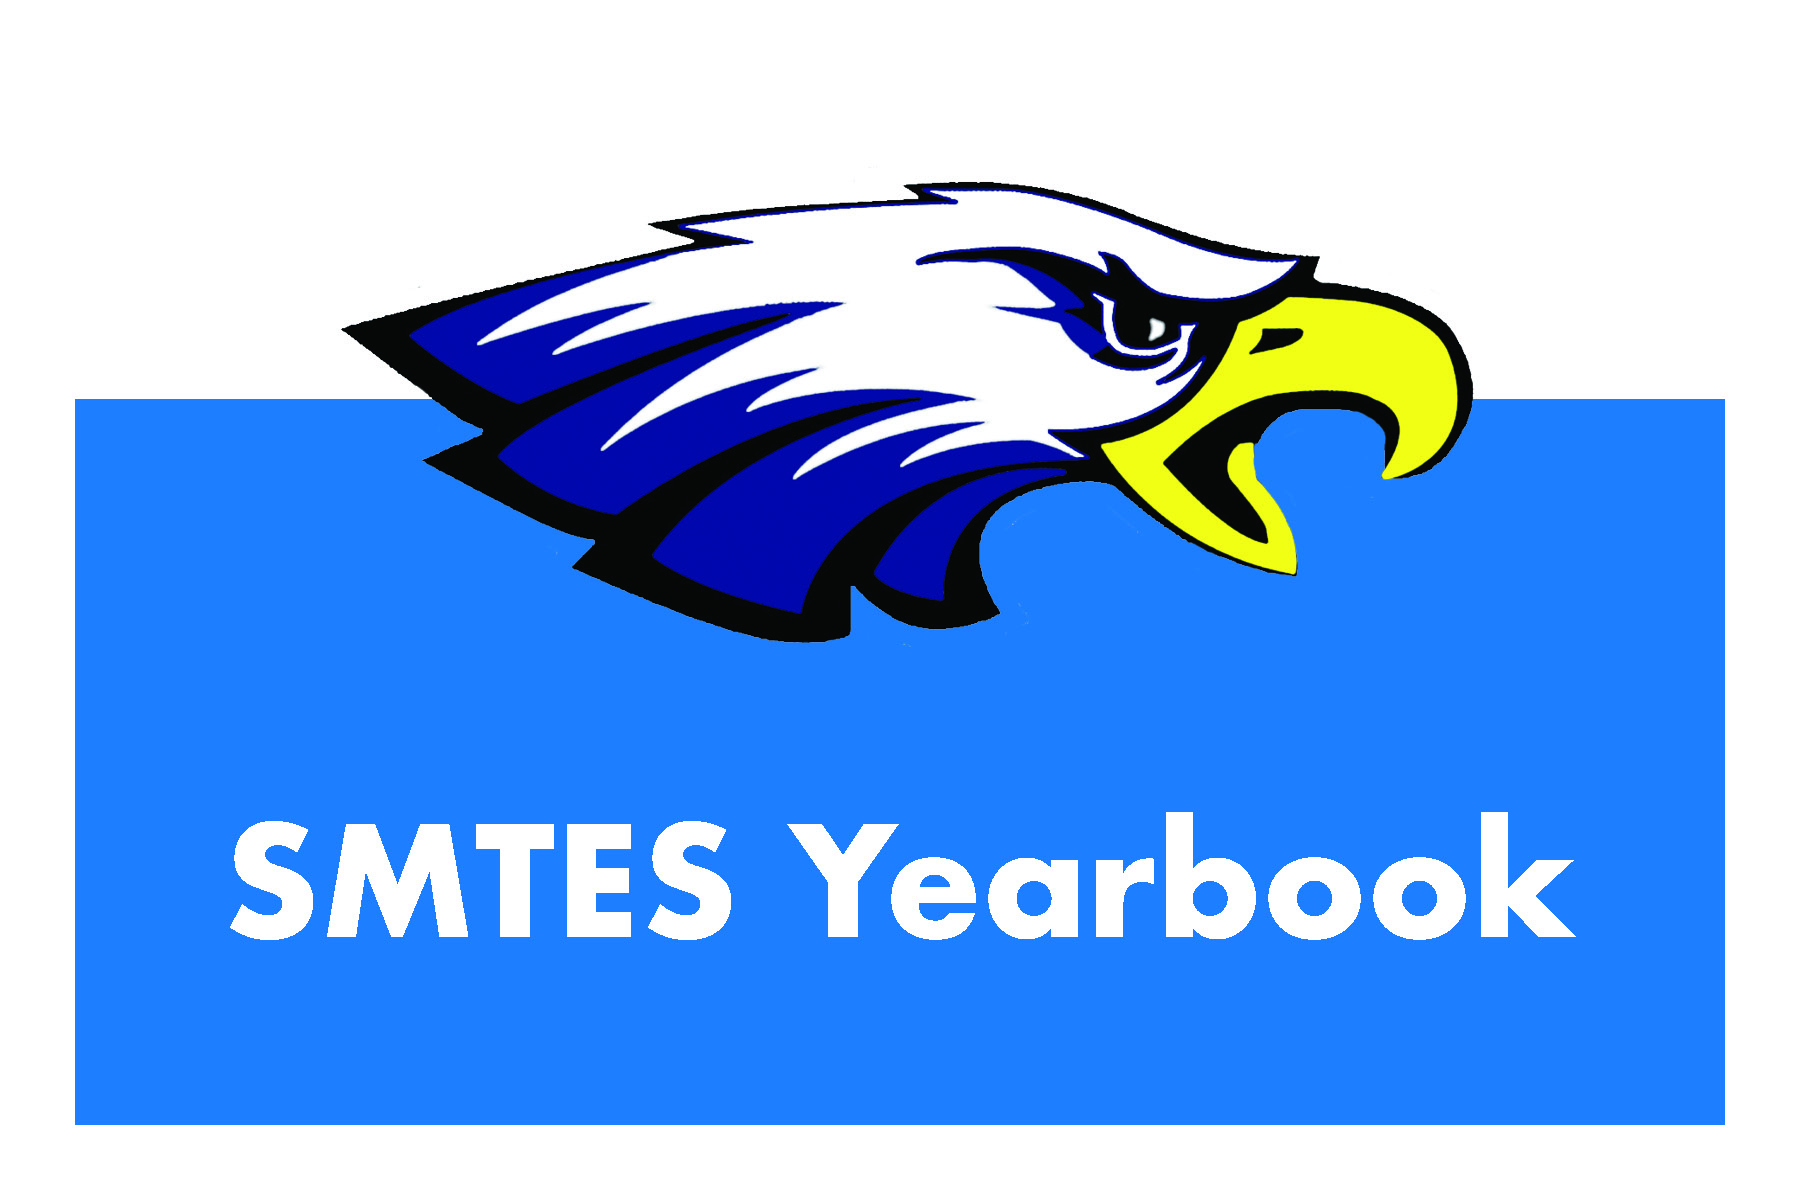 SMTES Yearbook